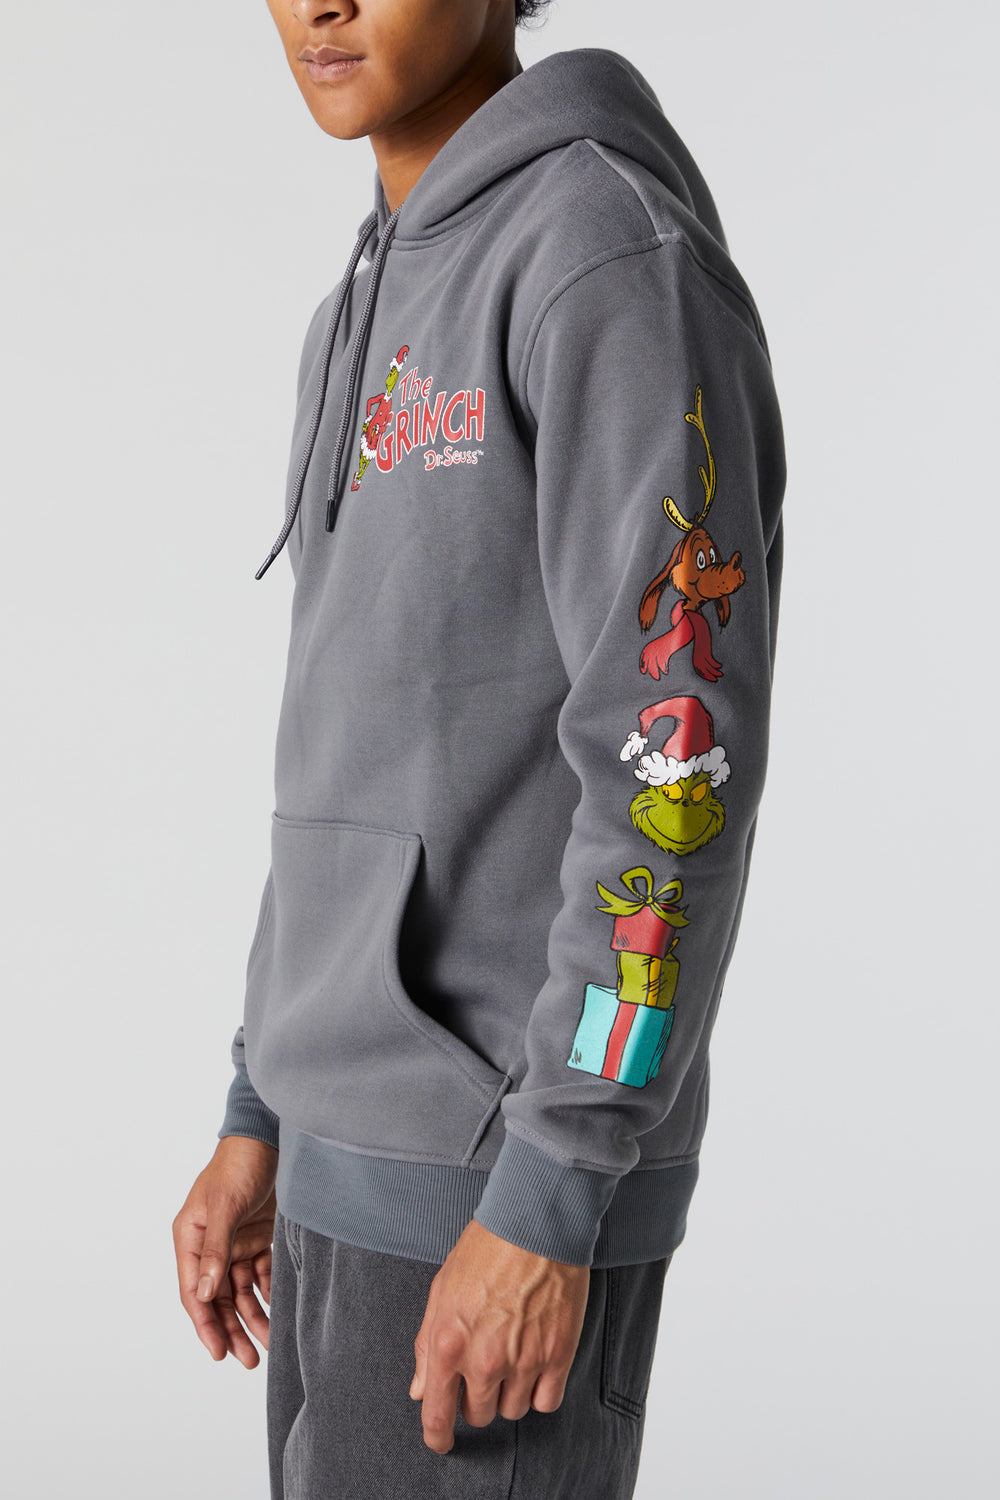 The Grinch Graphic Fleece Hoodie The Grinch Graphic Fleece Hoodie 4